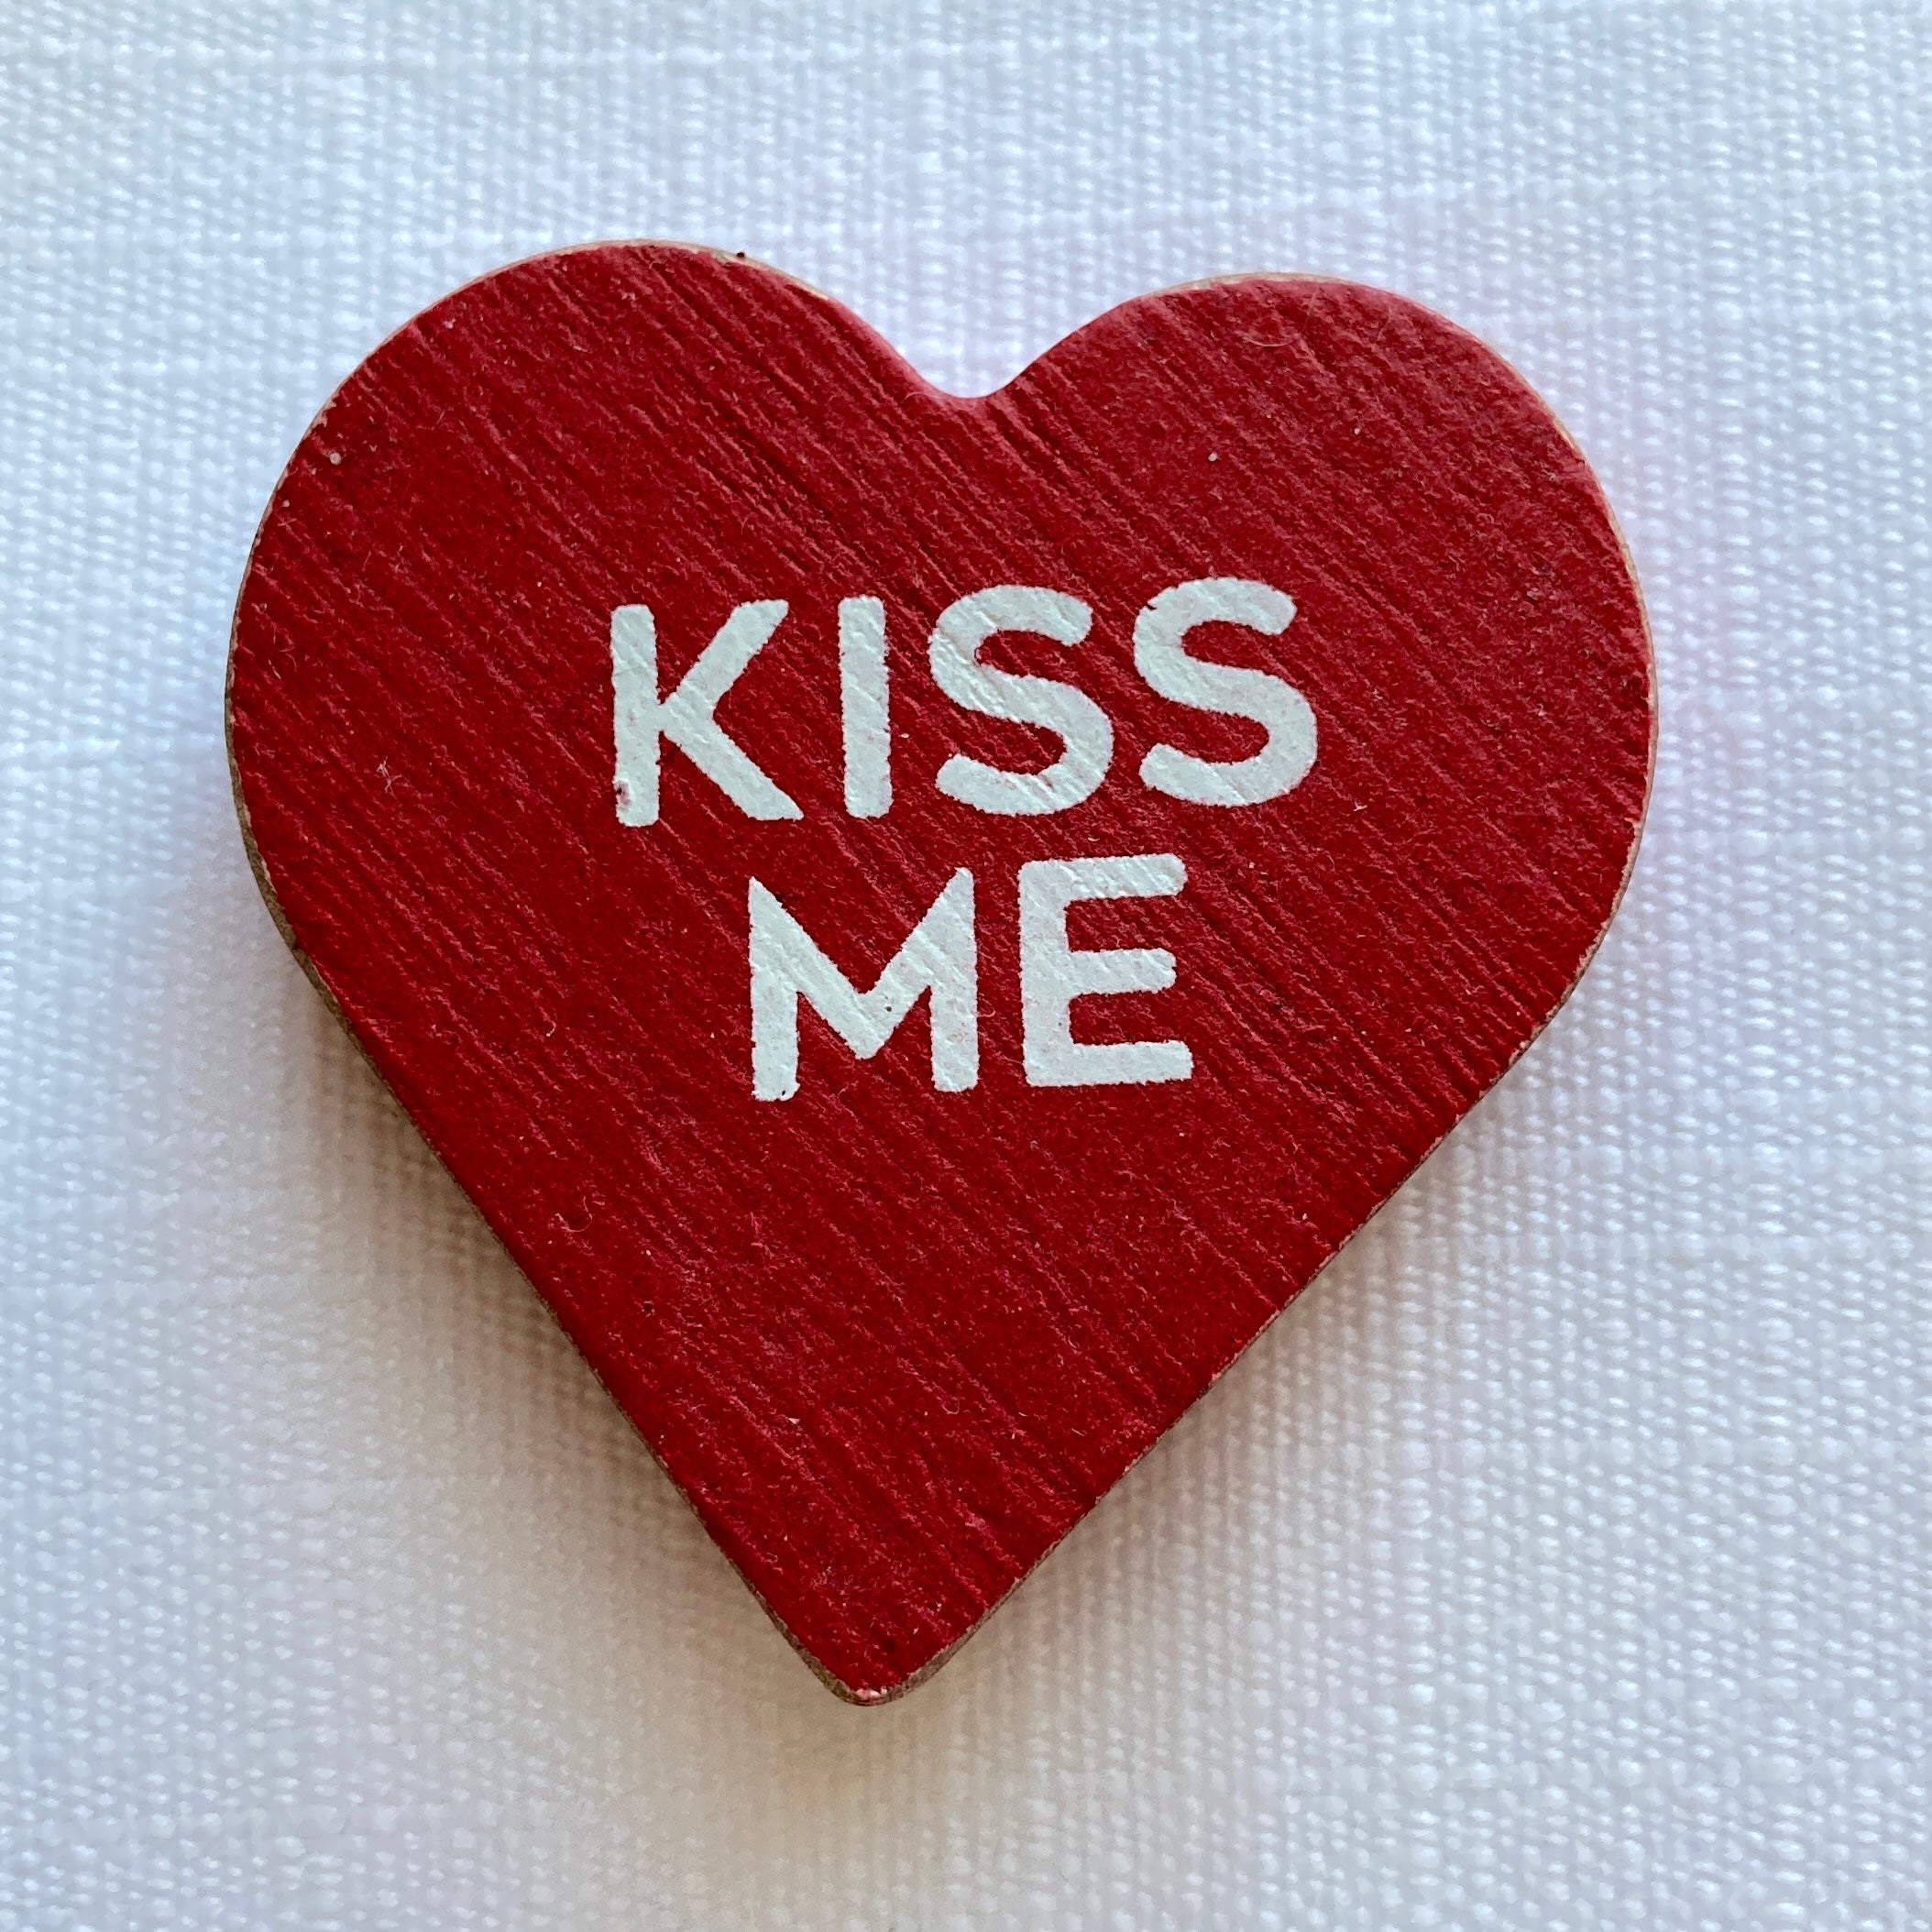 Kiss Me red heart - Adams & Co tile cutout shape for letterboard